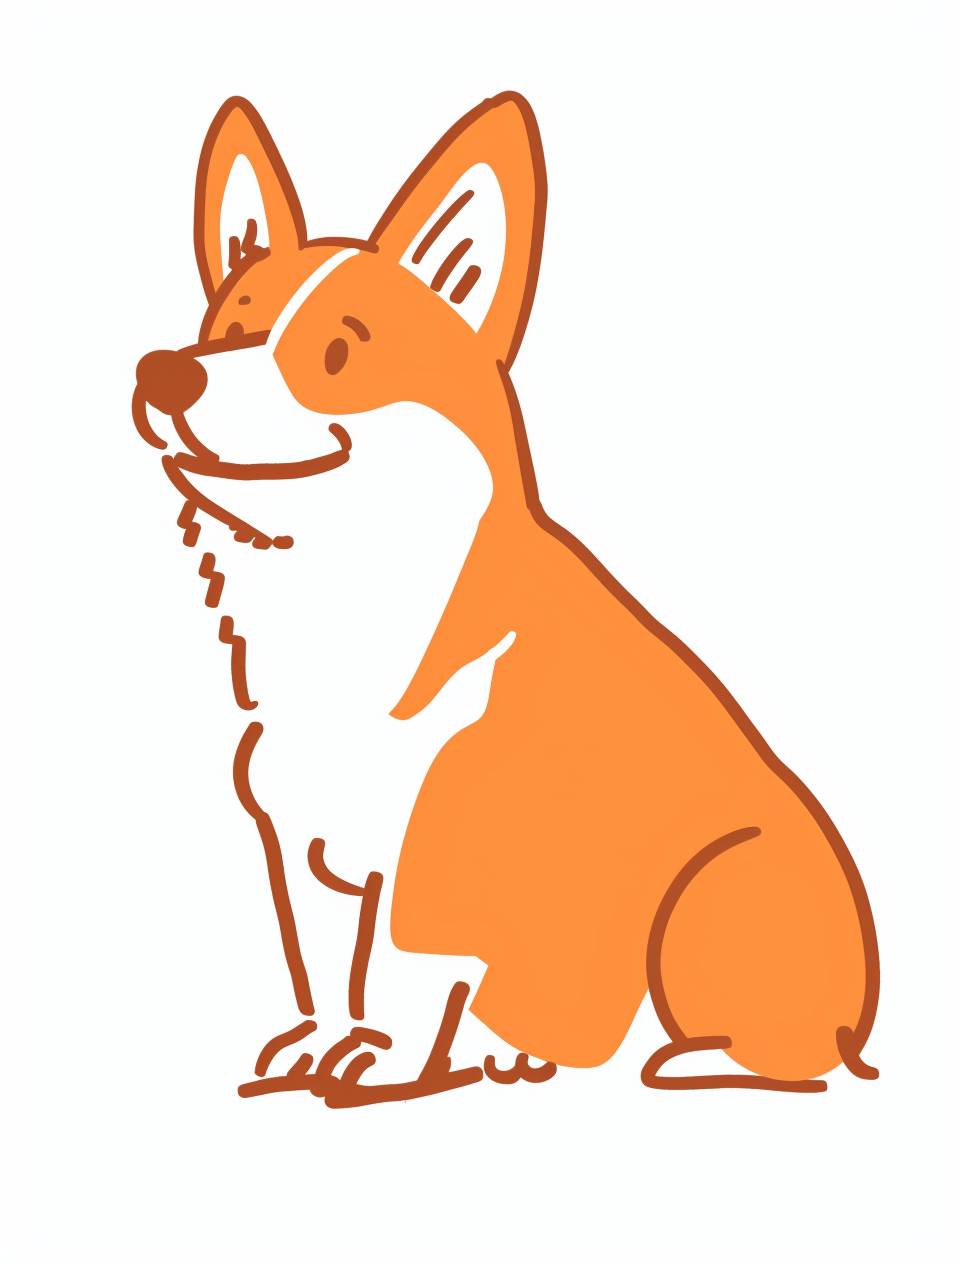 Simple and cute illustration of an orange and white corgi dog, using simple shapes in doodle style on a white background with bold hand-drawn lines, featuring a happy expression cartoon character design in the style of Ryo Takemasa.